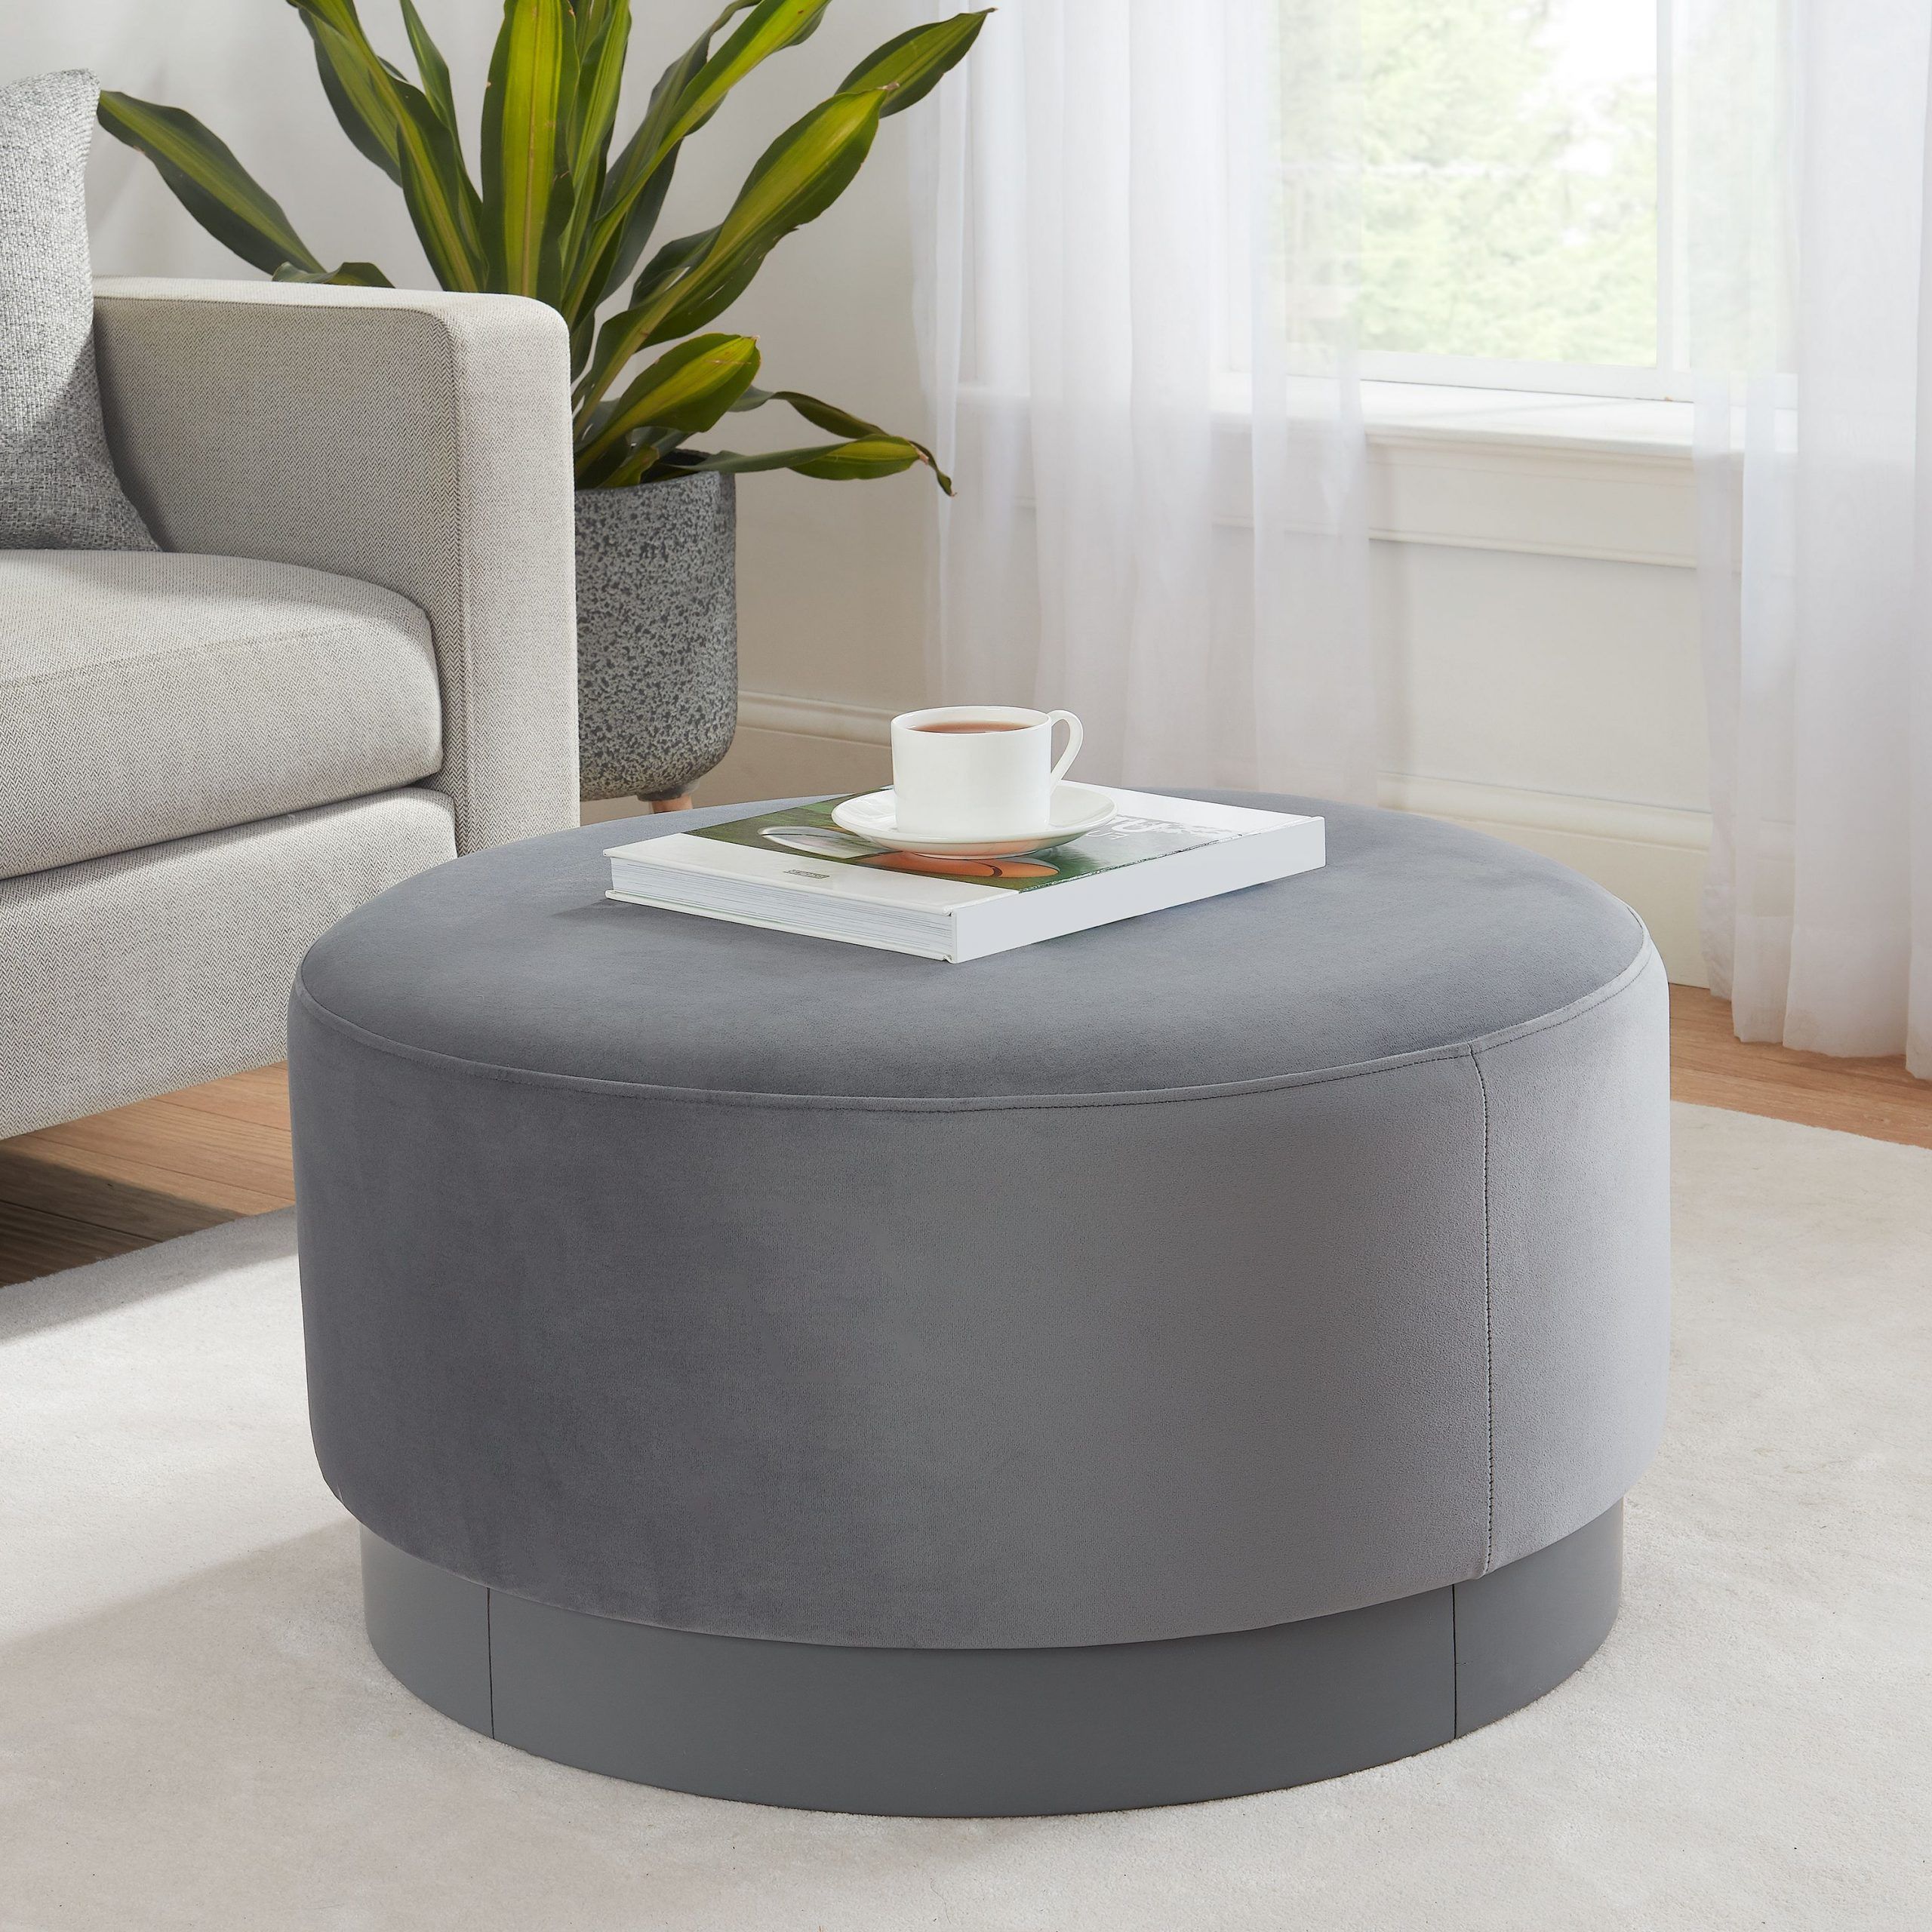 Wool Round Pouf Ottomans In Current Better Homes & Gardens Addison Large Round Ottoman, Multiple Colors (View 6 of 10)